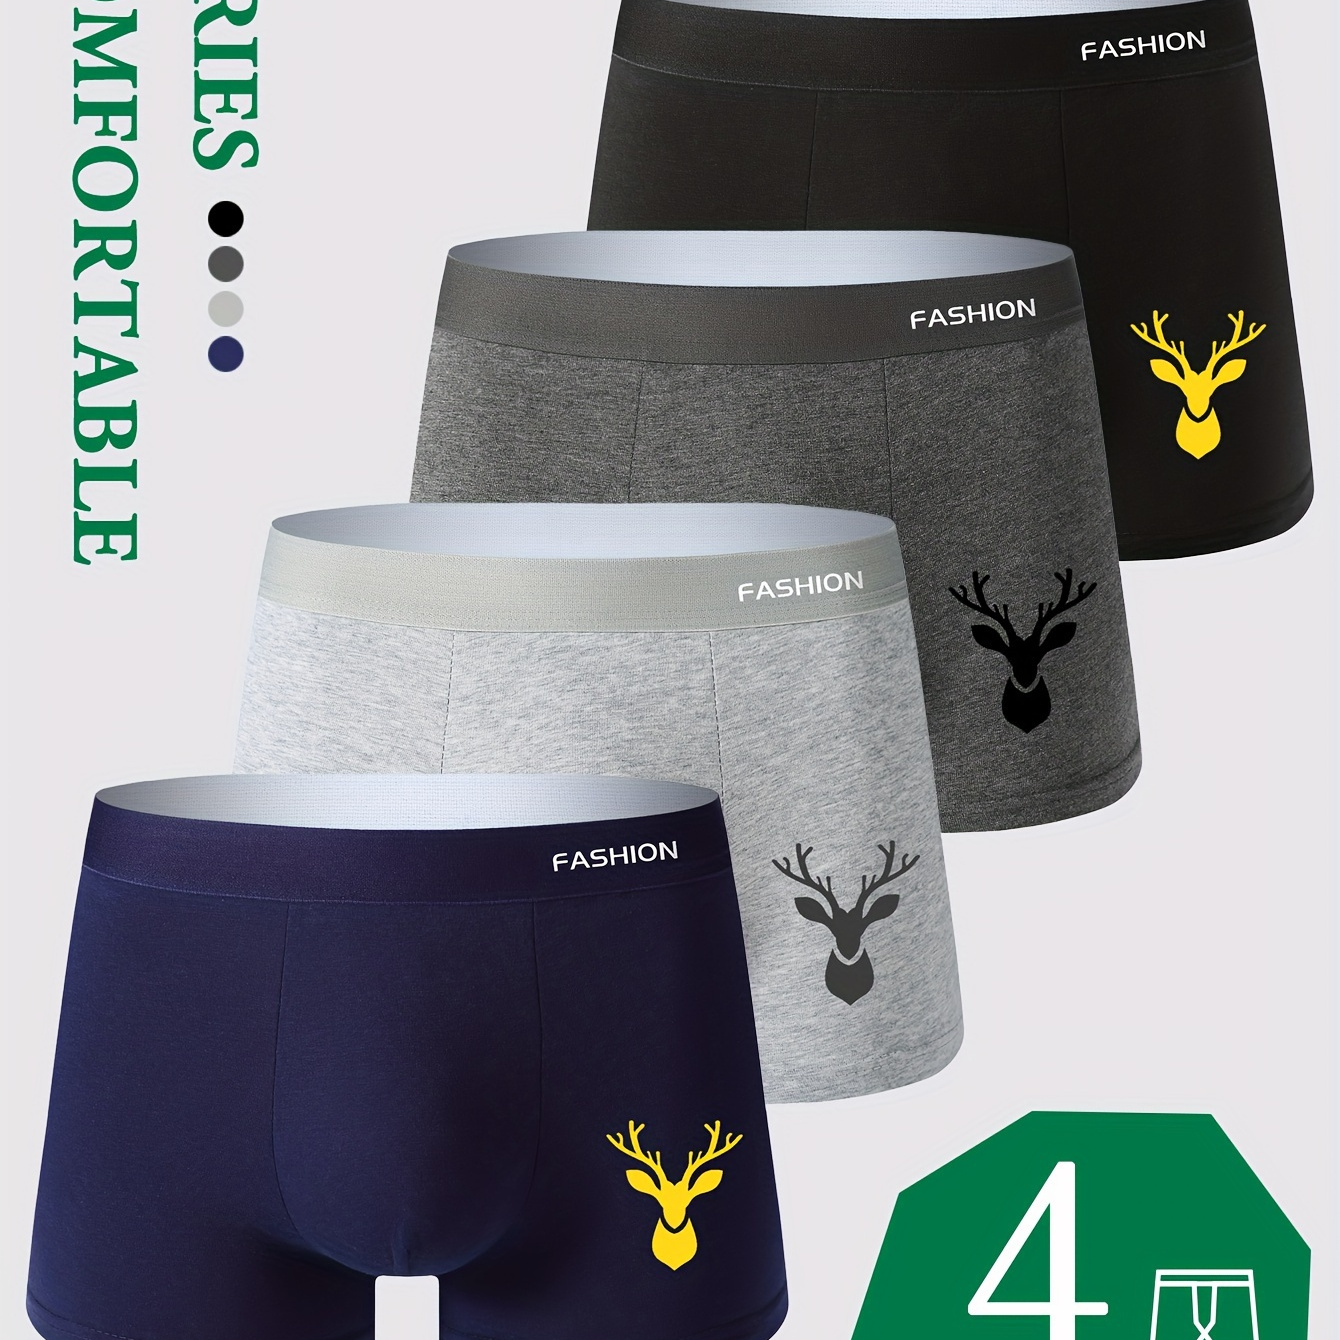 

4pcs Pattern Men's Underwear, Casual Boxer Briefs Shorts, Breathable Comfy Stretchy Boxer Trunks, Sports Shorts